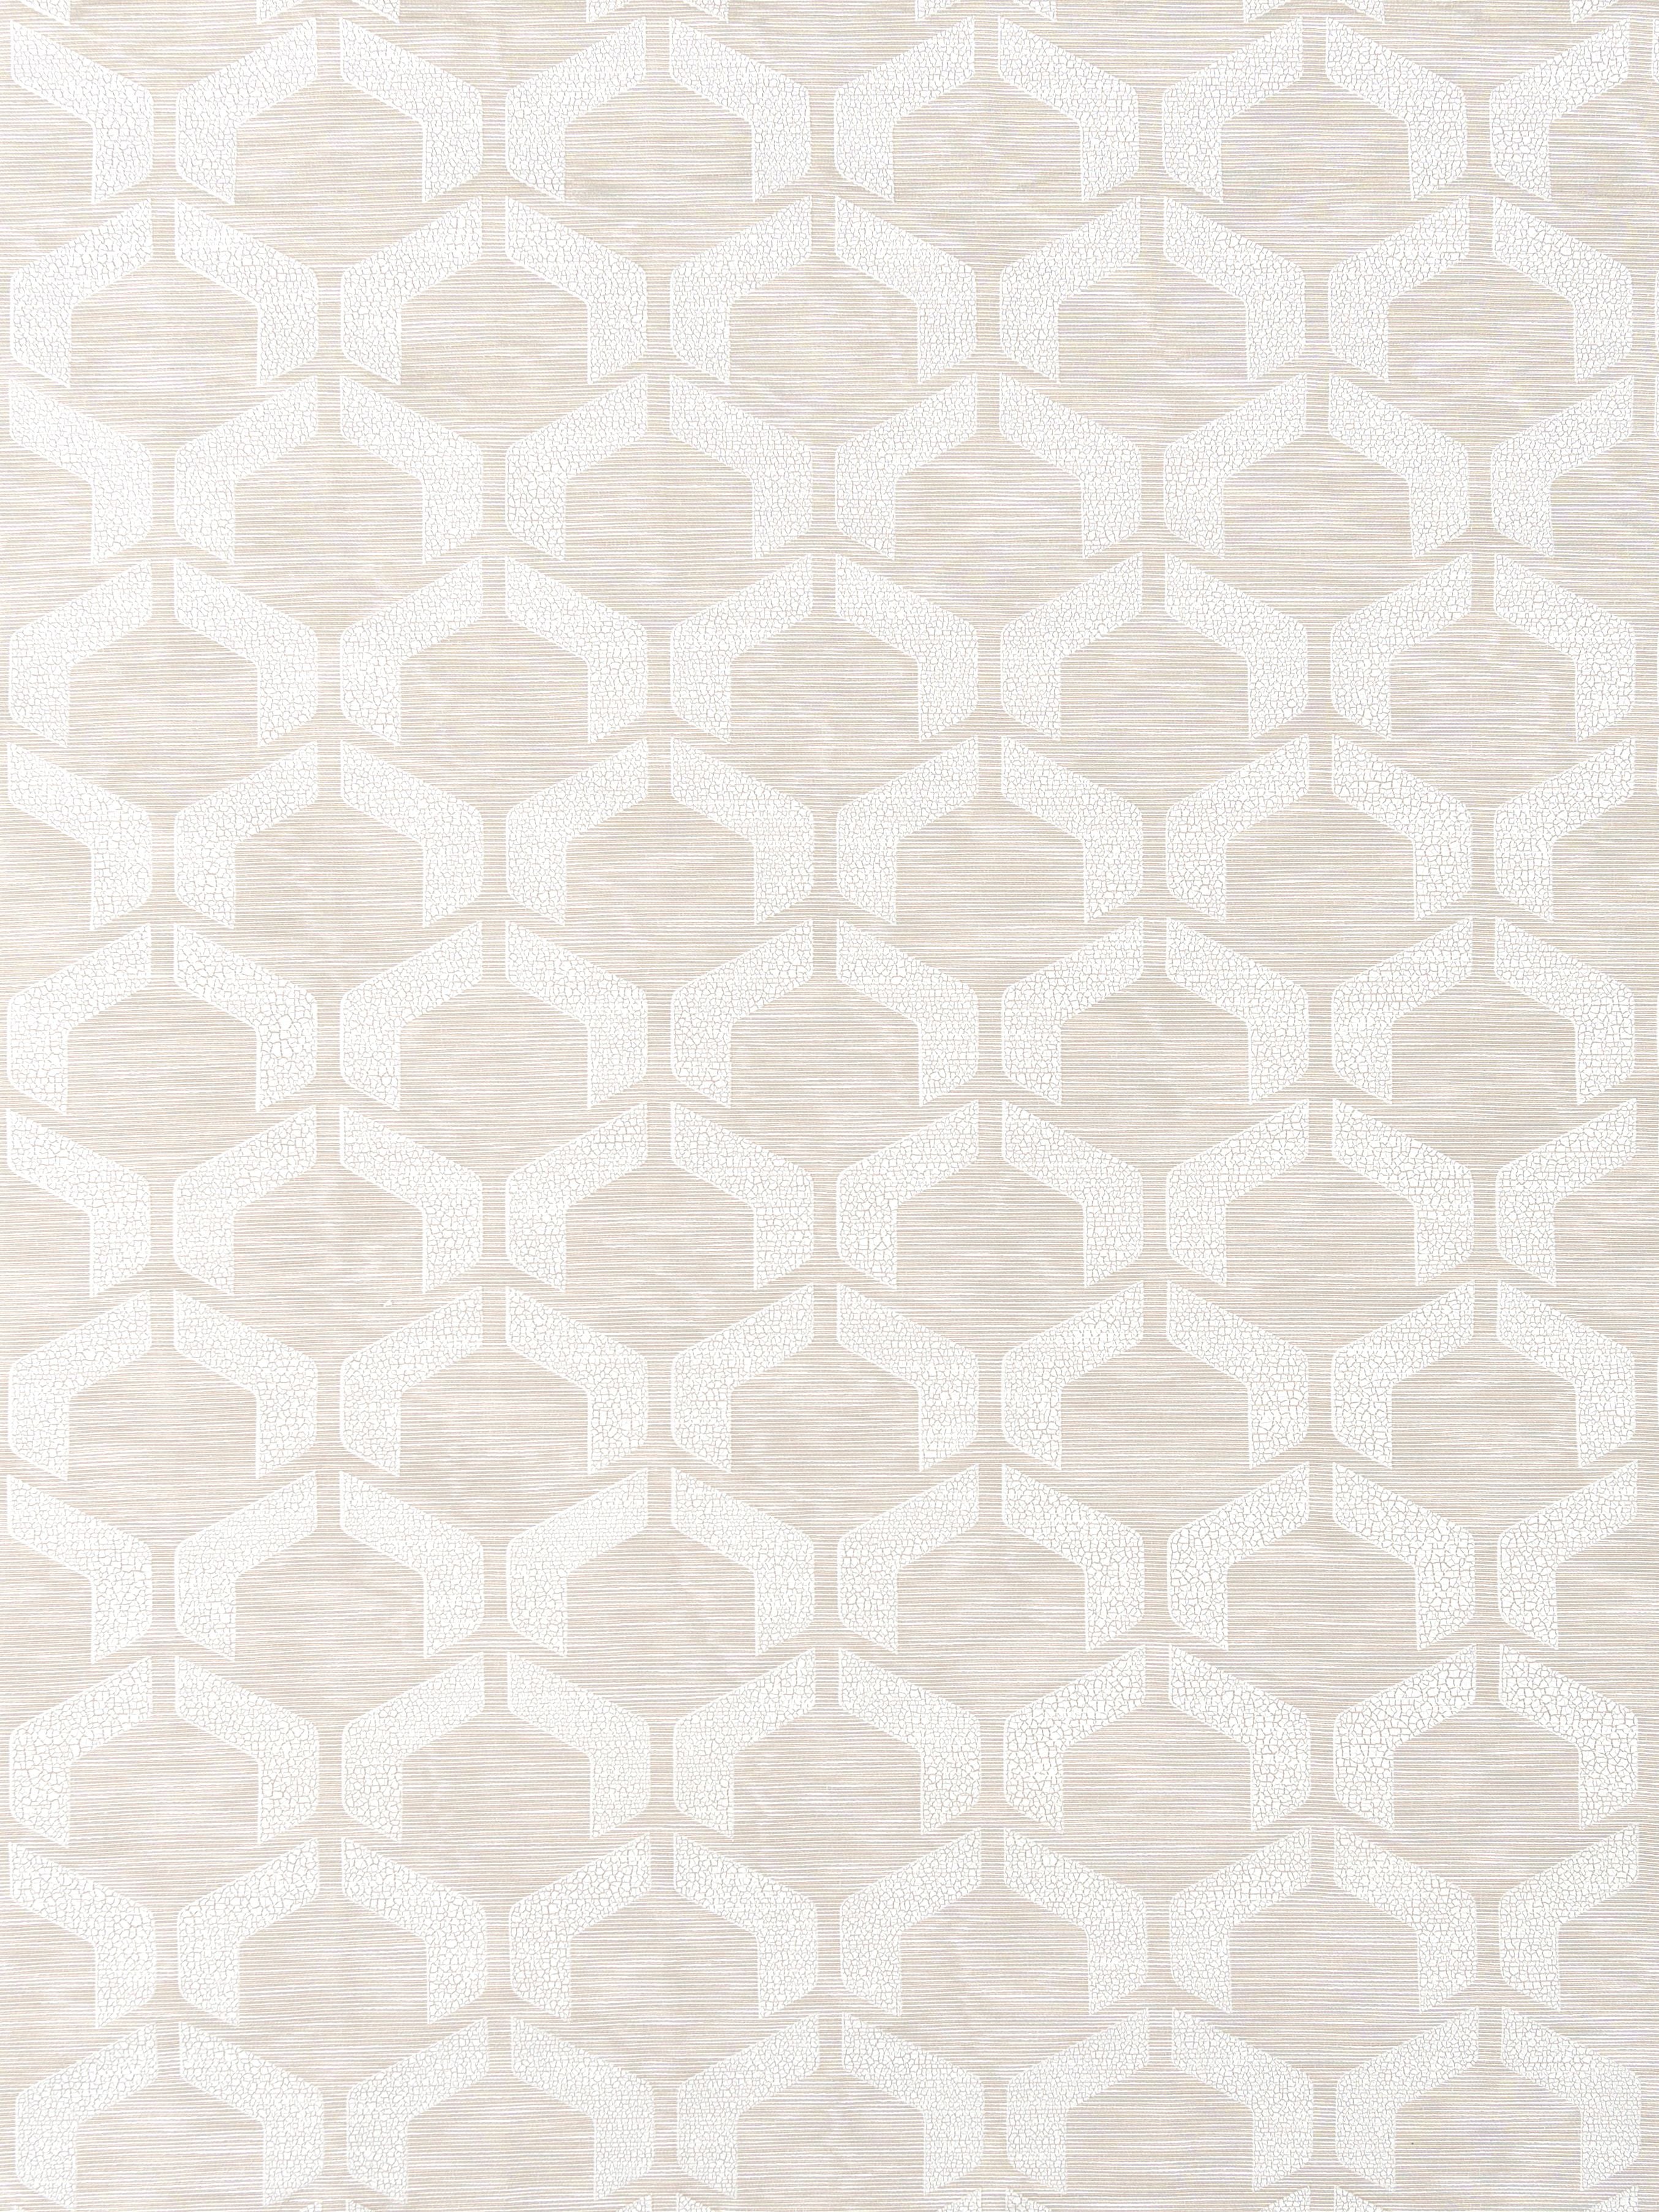 Craquele fabric in ivory color - pattern number DB 0002D297 - by Scalamandre in the Old World Weavers collection